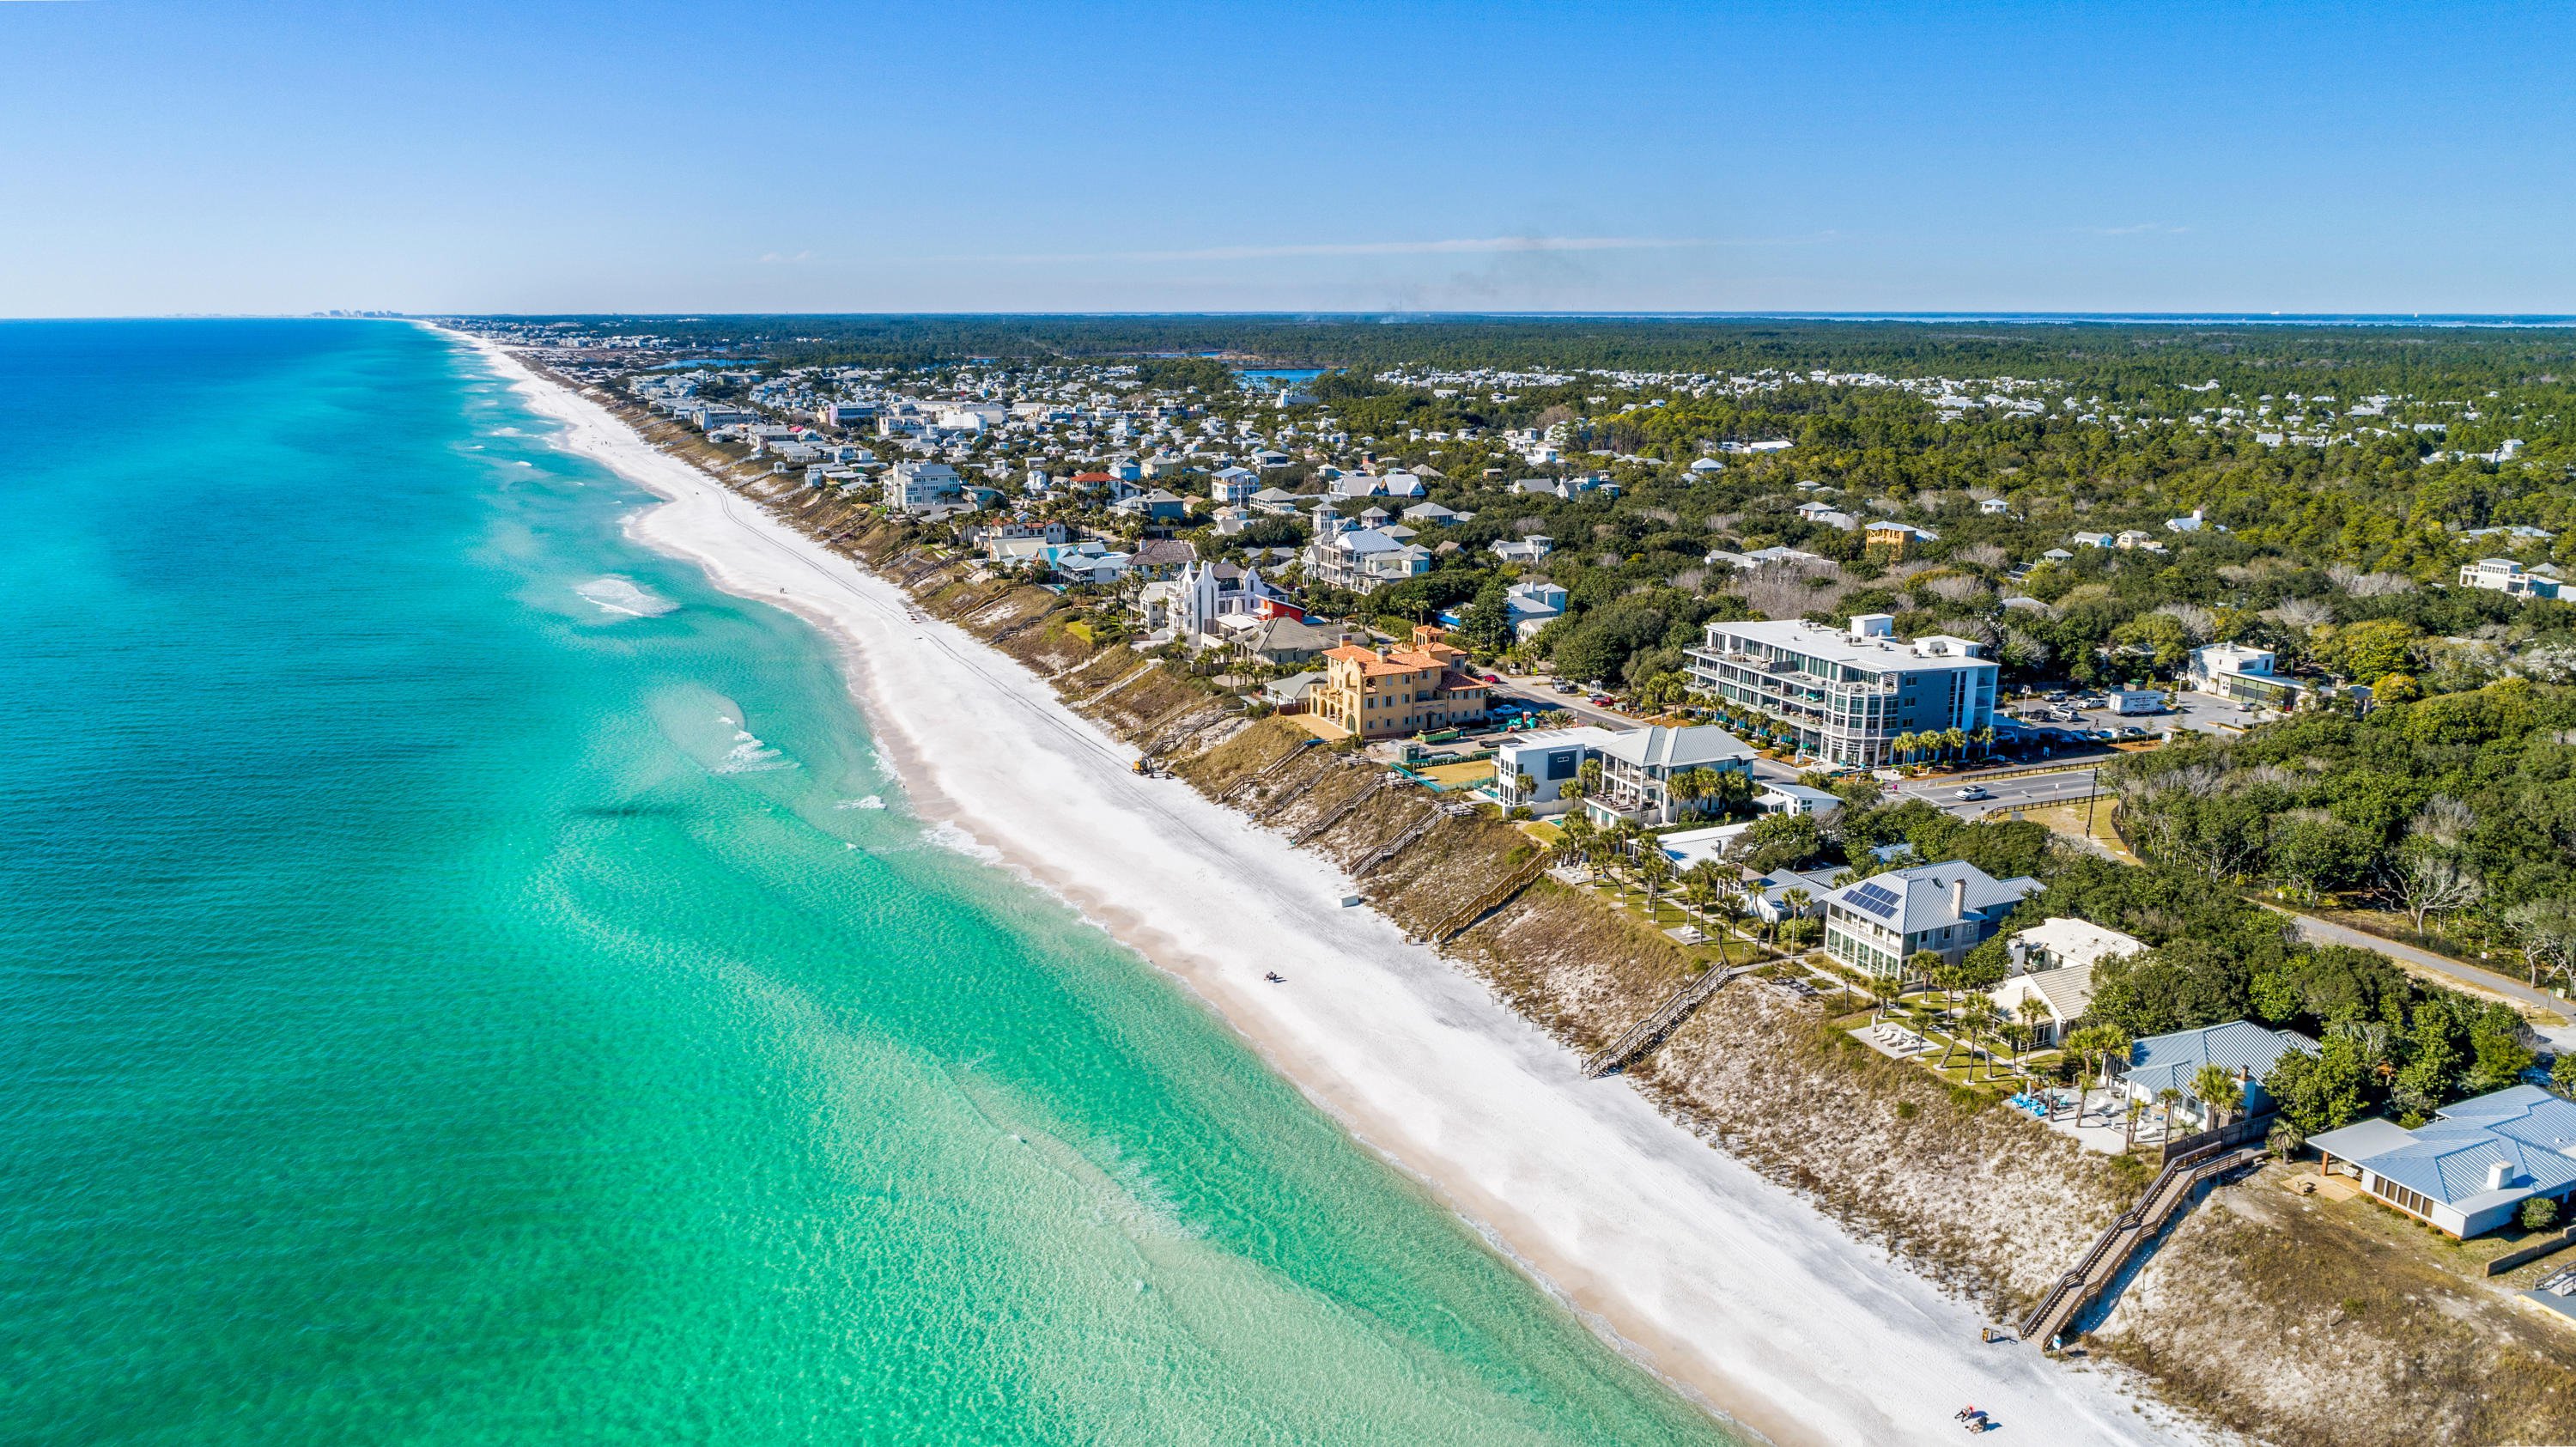 Another Aerial Shot of Seagrove Beach and Viridian